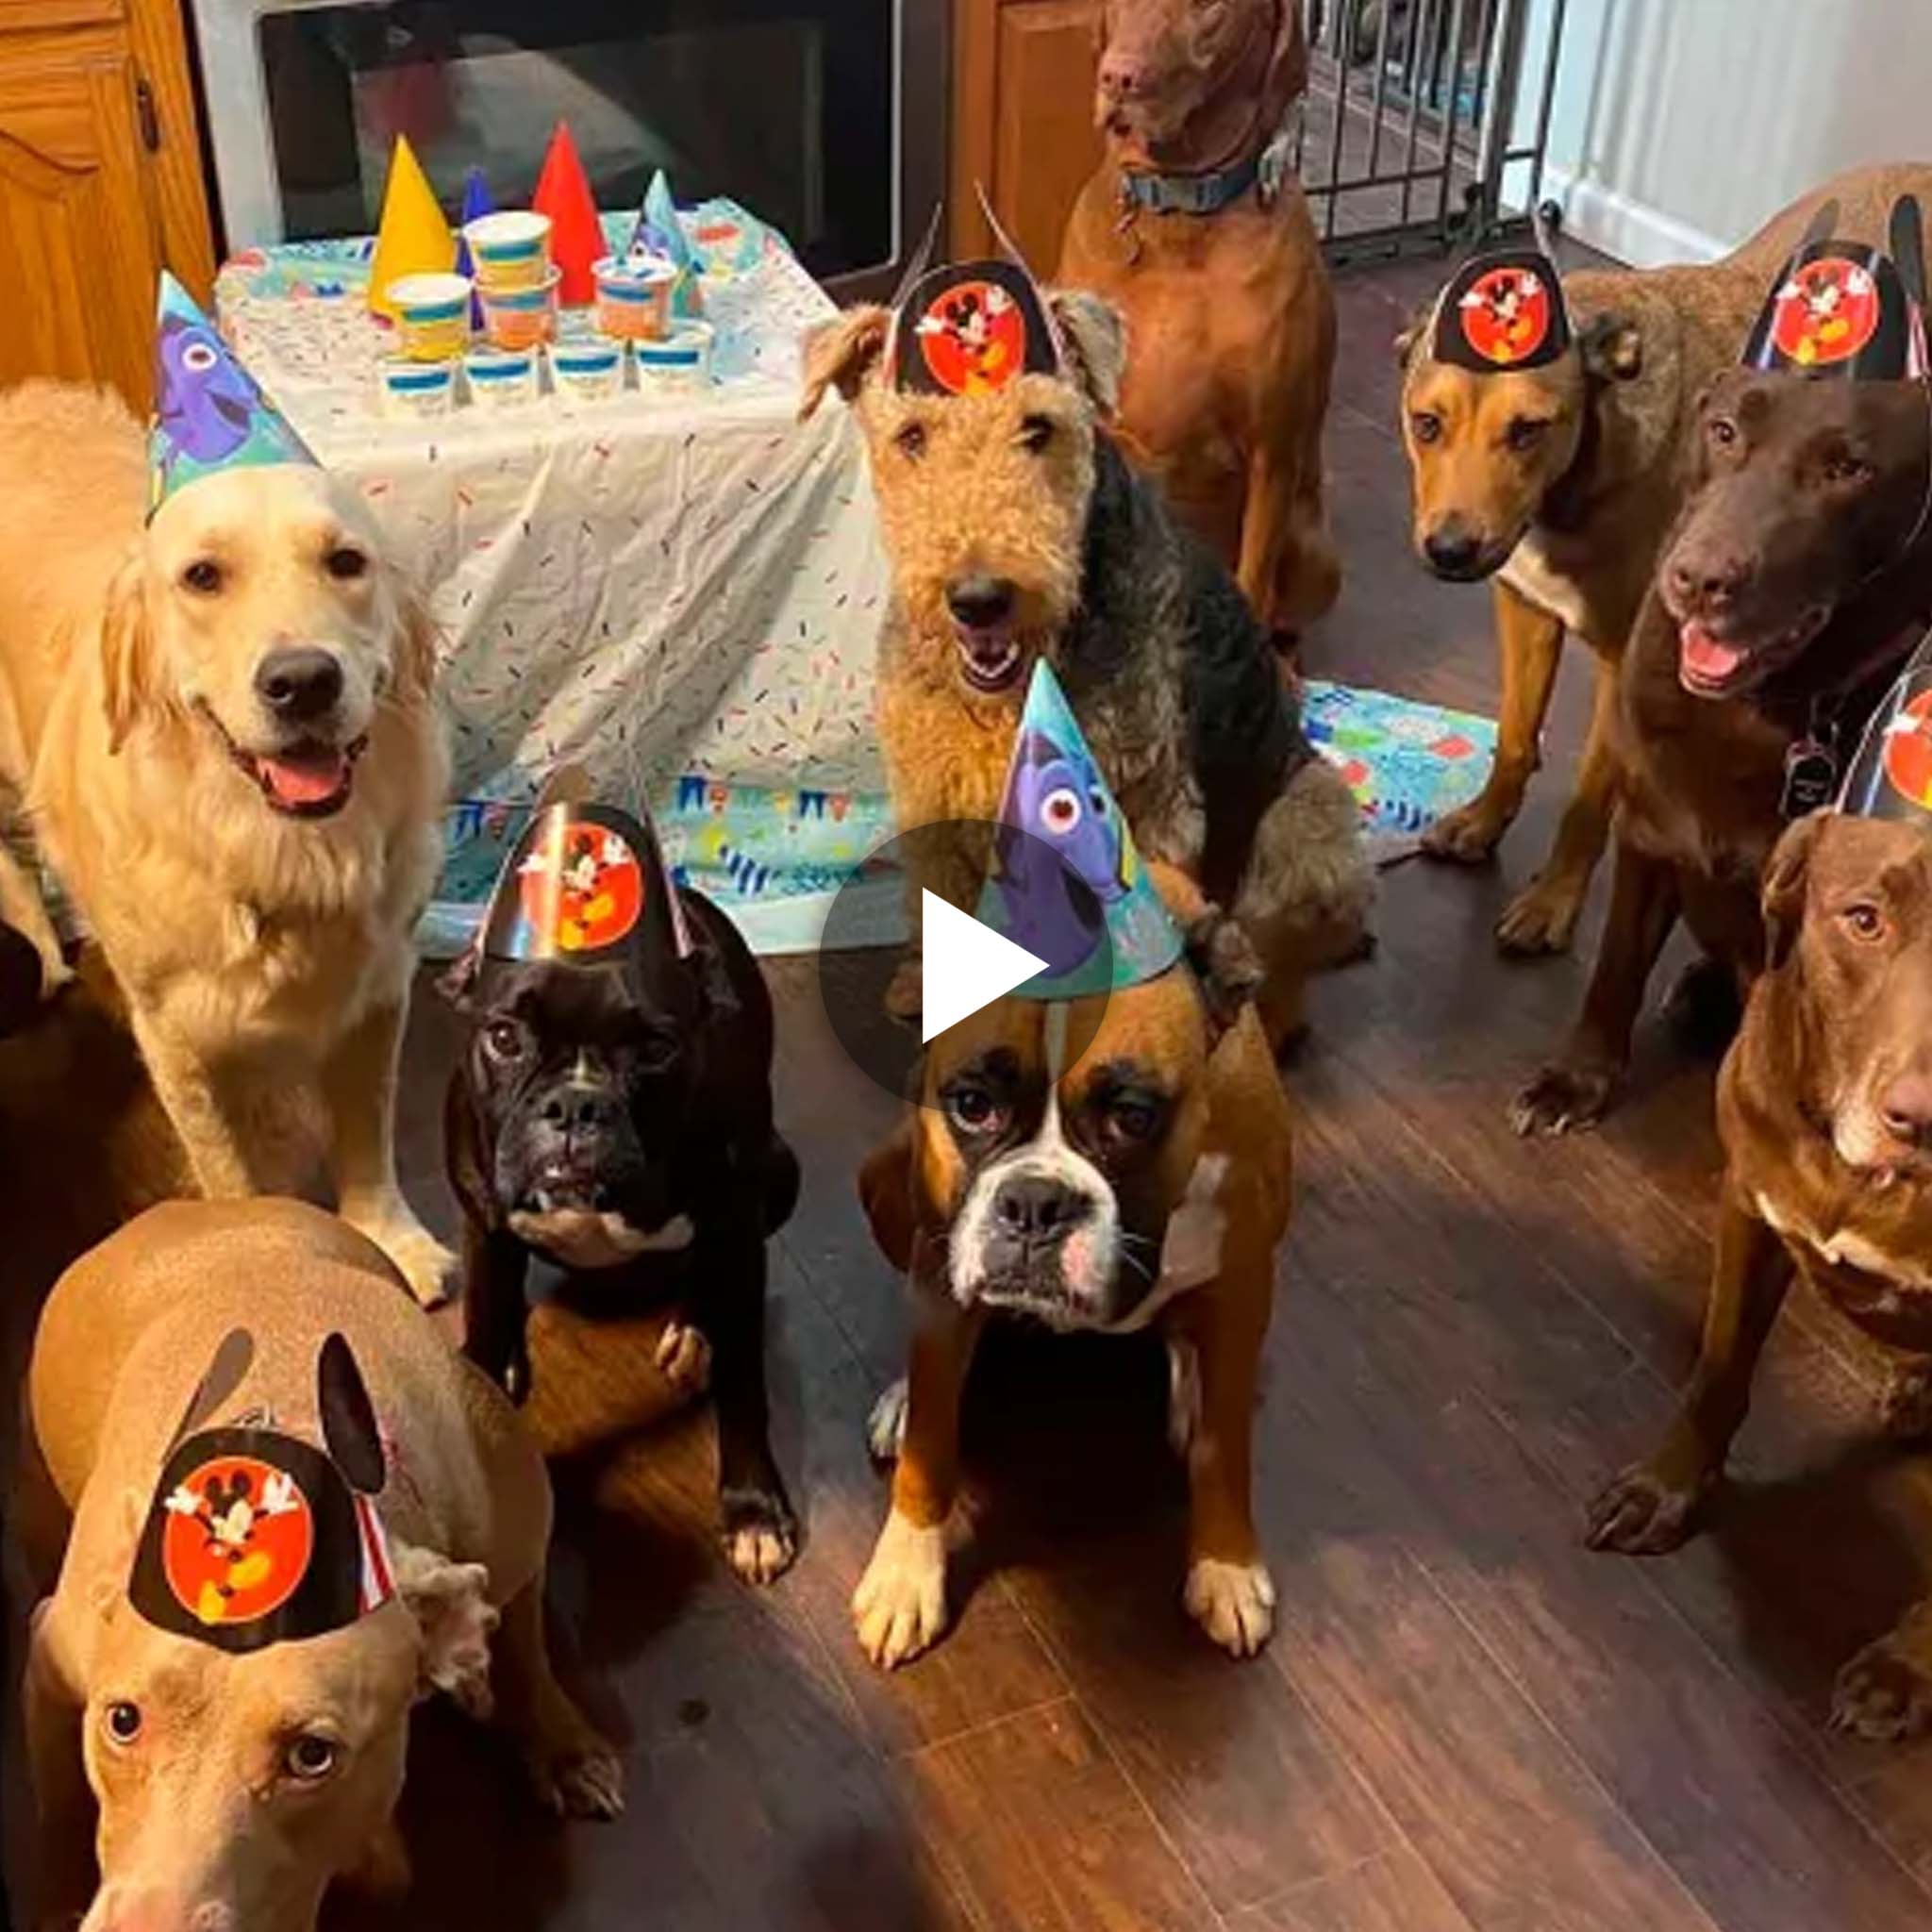 An abandoned dog celebrates his birthday in style with his new best friends.